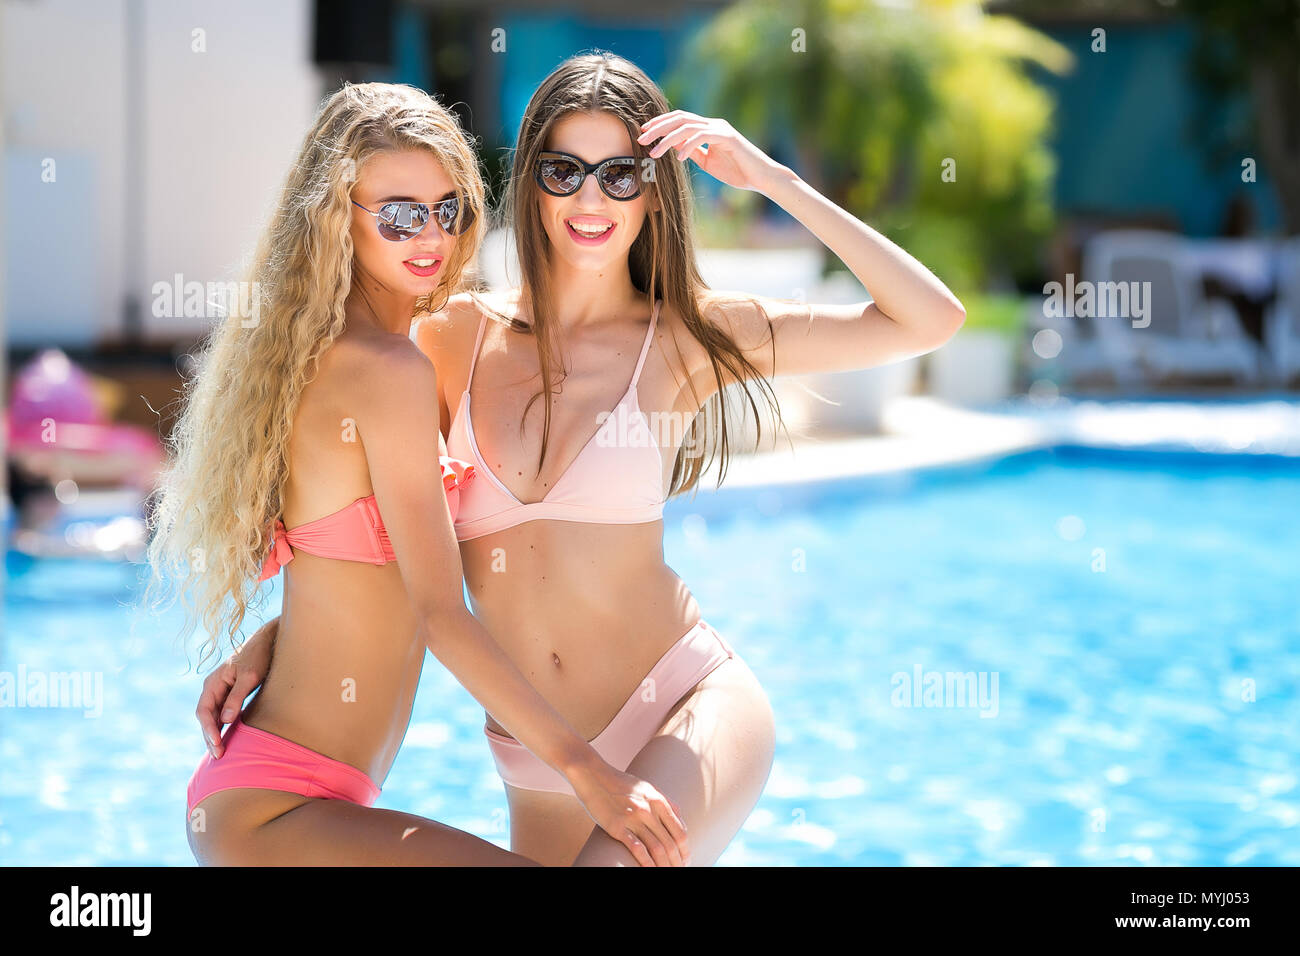 vacation, lifestyle, sex concept. there are two girlfriends, models, they are posing and holding each other, smiling at the camera surrounded with palm trees and summer sunlight Stock Photo